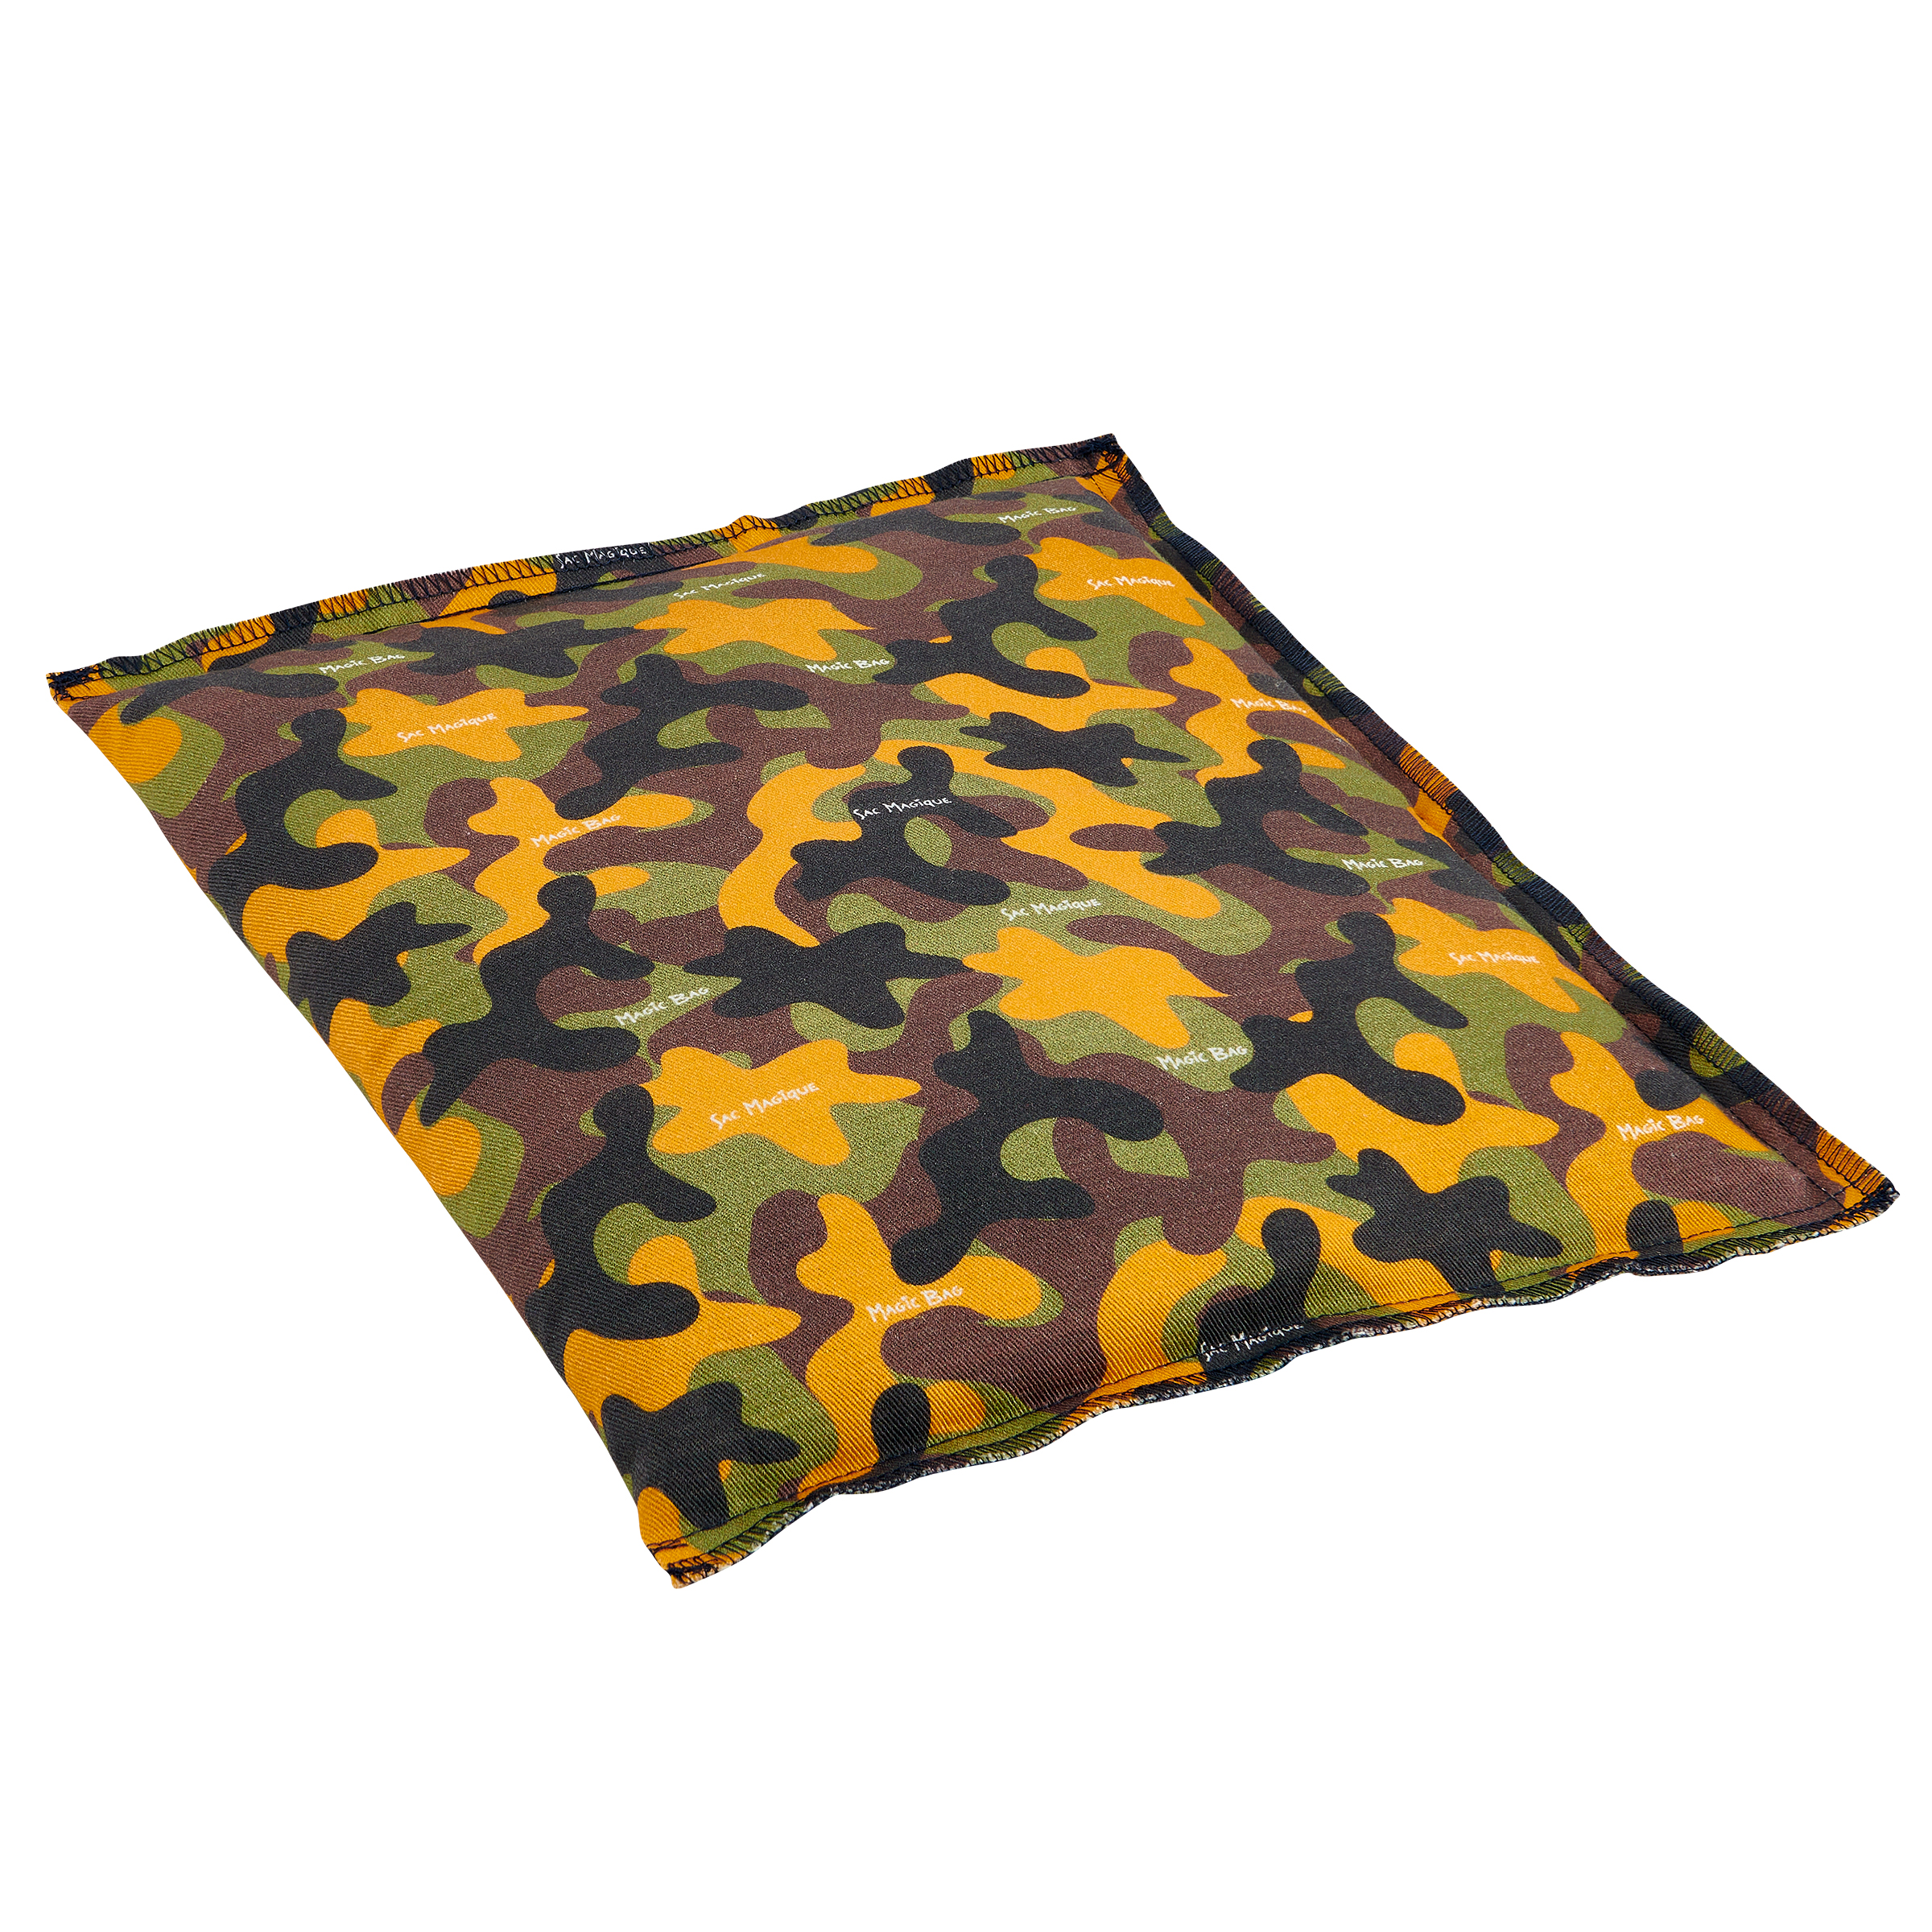 Limited Edition Pad: Camouflage